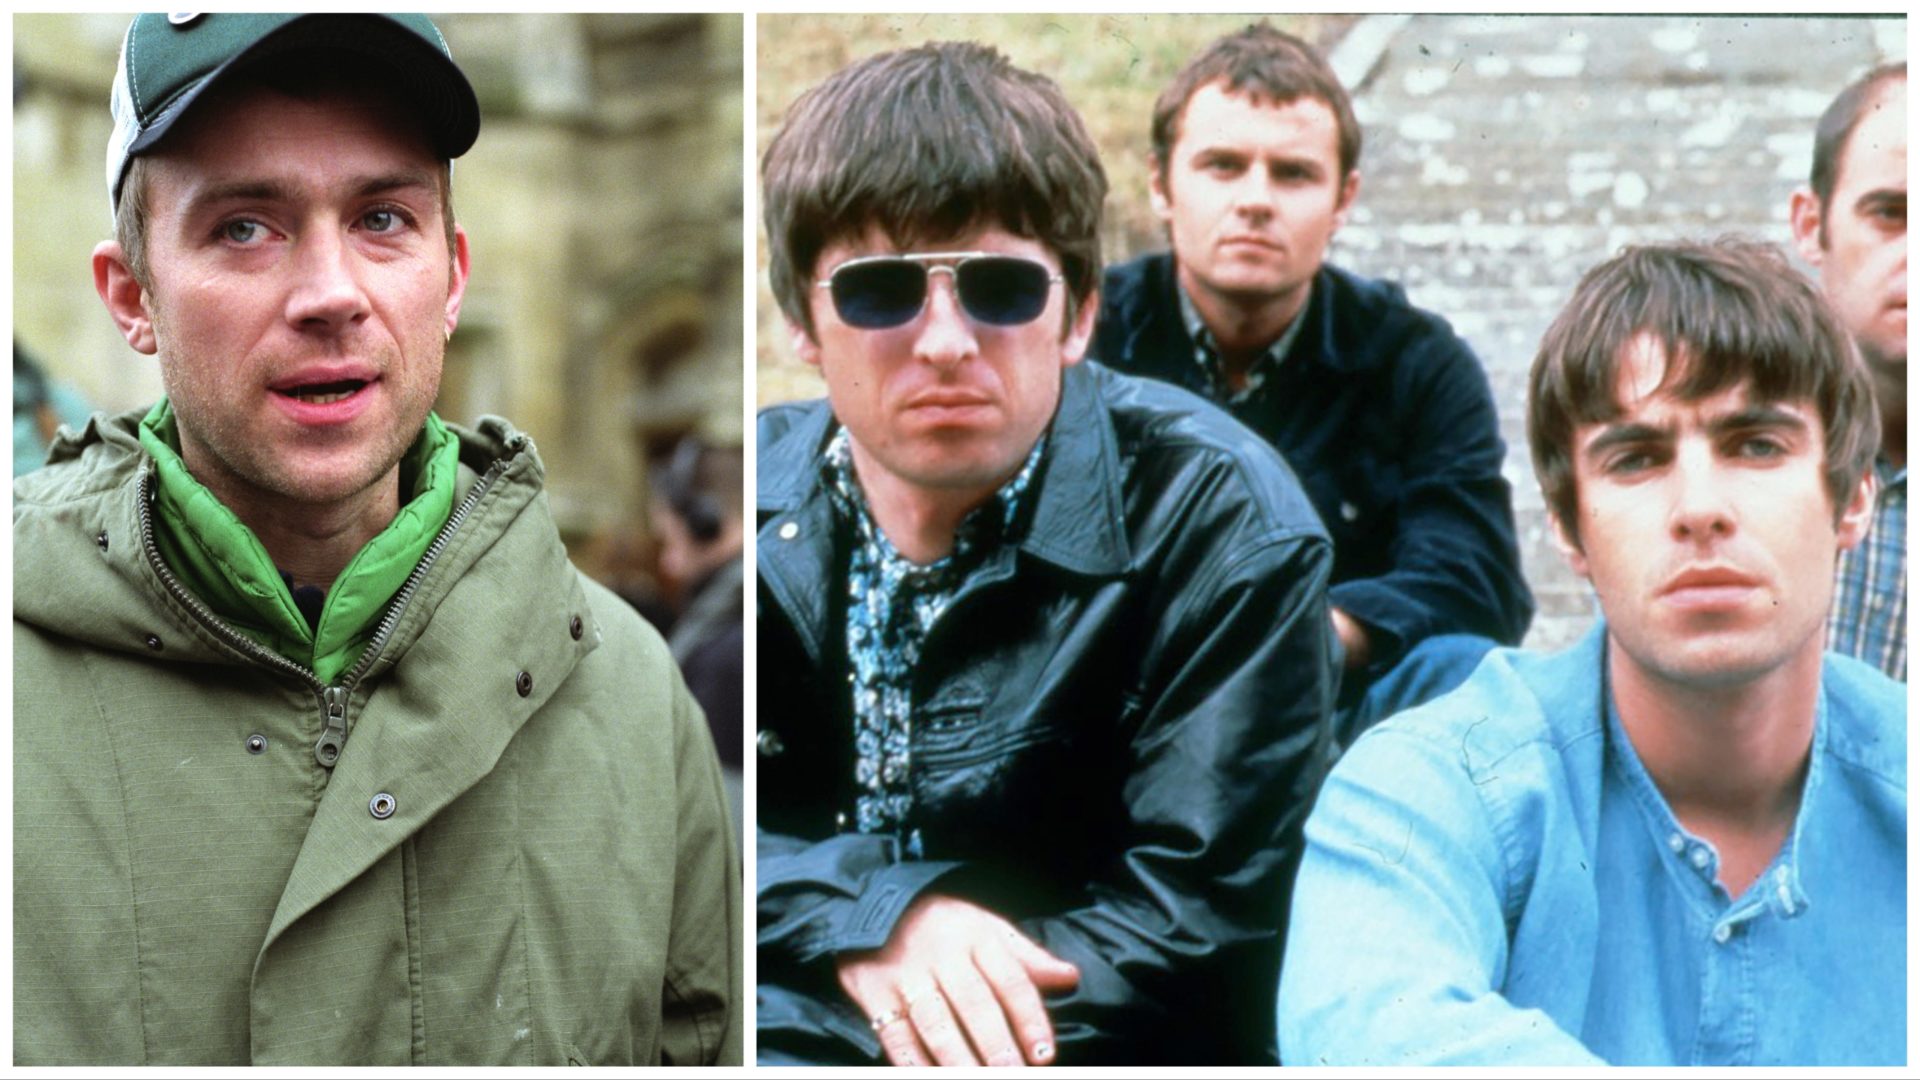 Damon Albarn Reveals He's Put Money On Oasis Getting Back Together